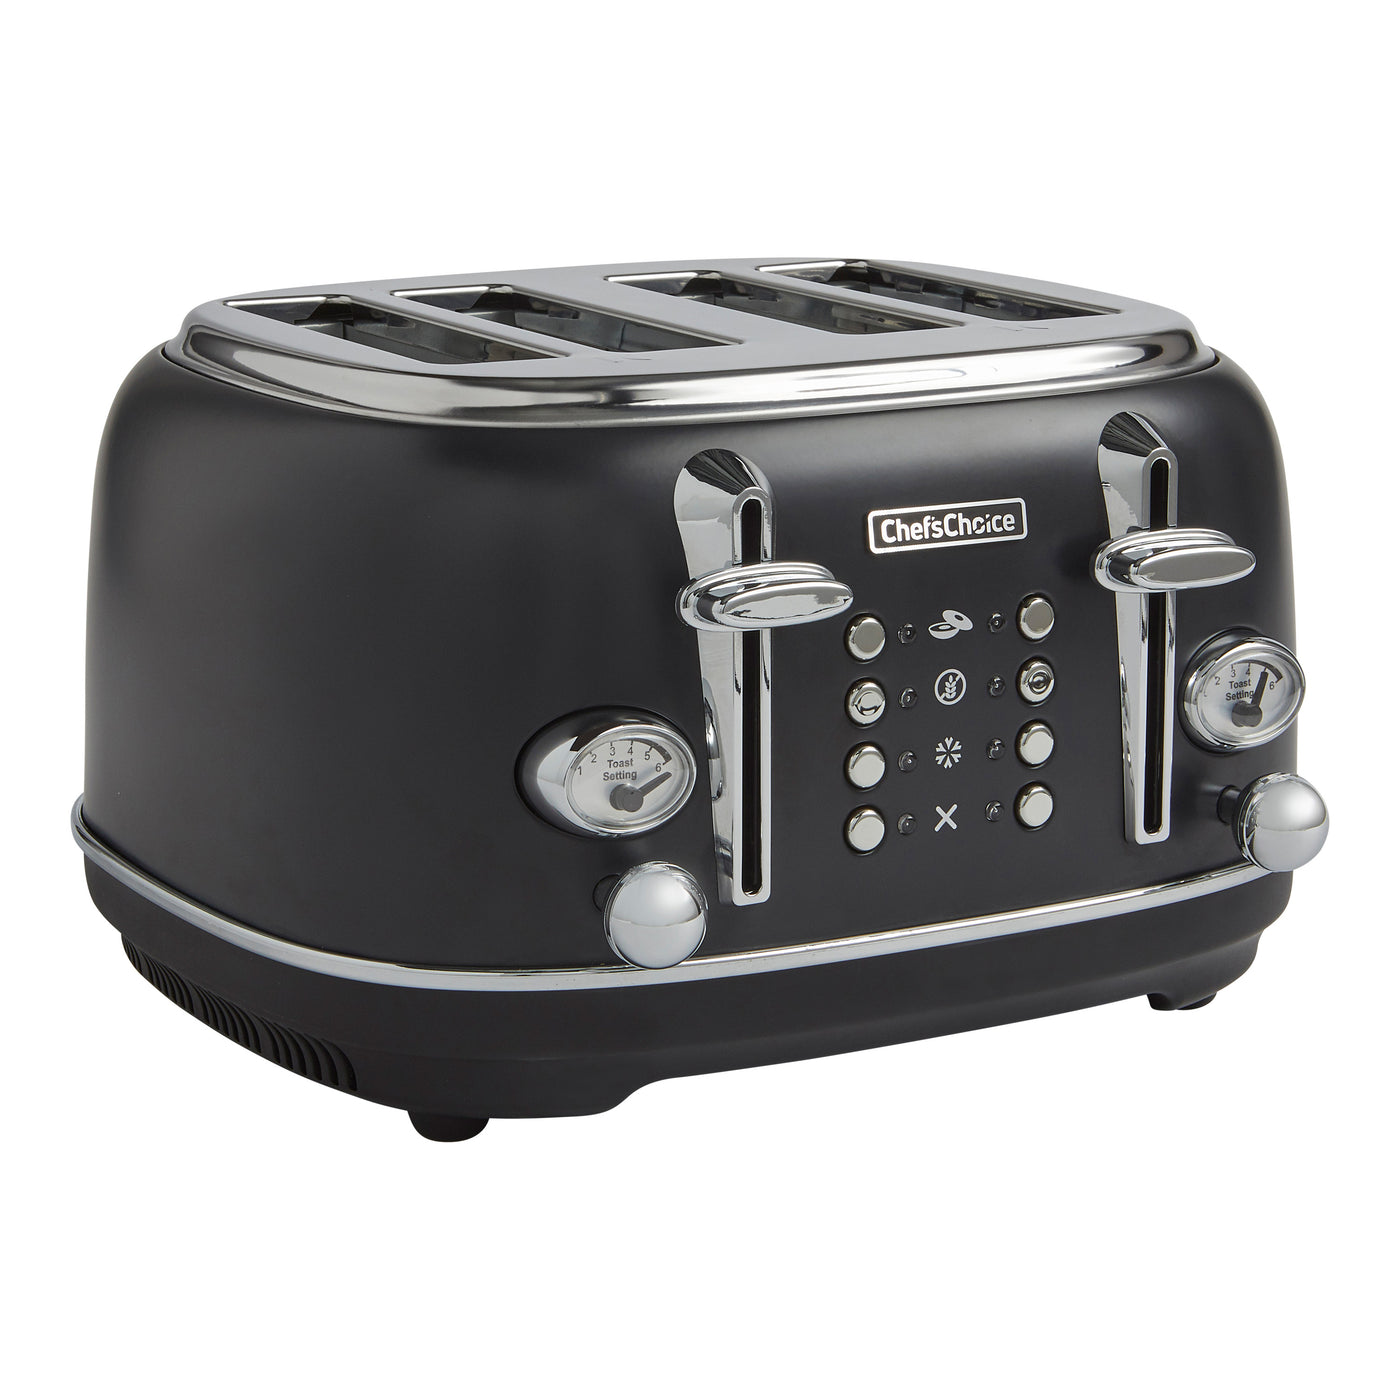 The Chef'sChoice Gourmezza 4 Slice Toaster steps up your style in